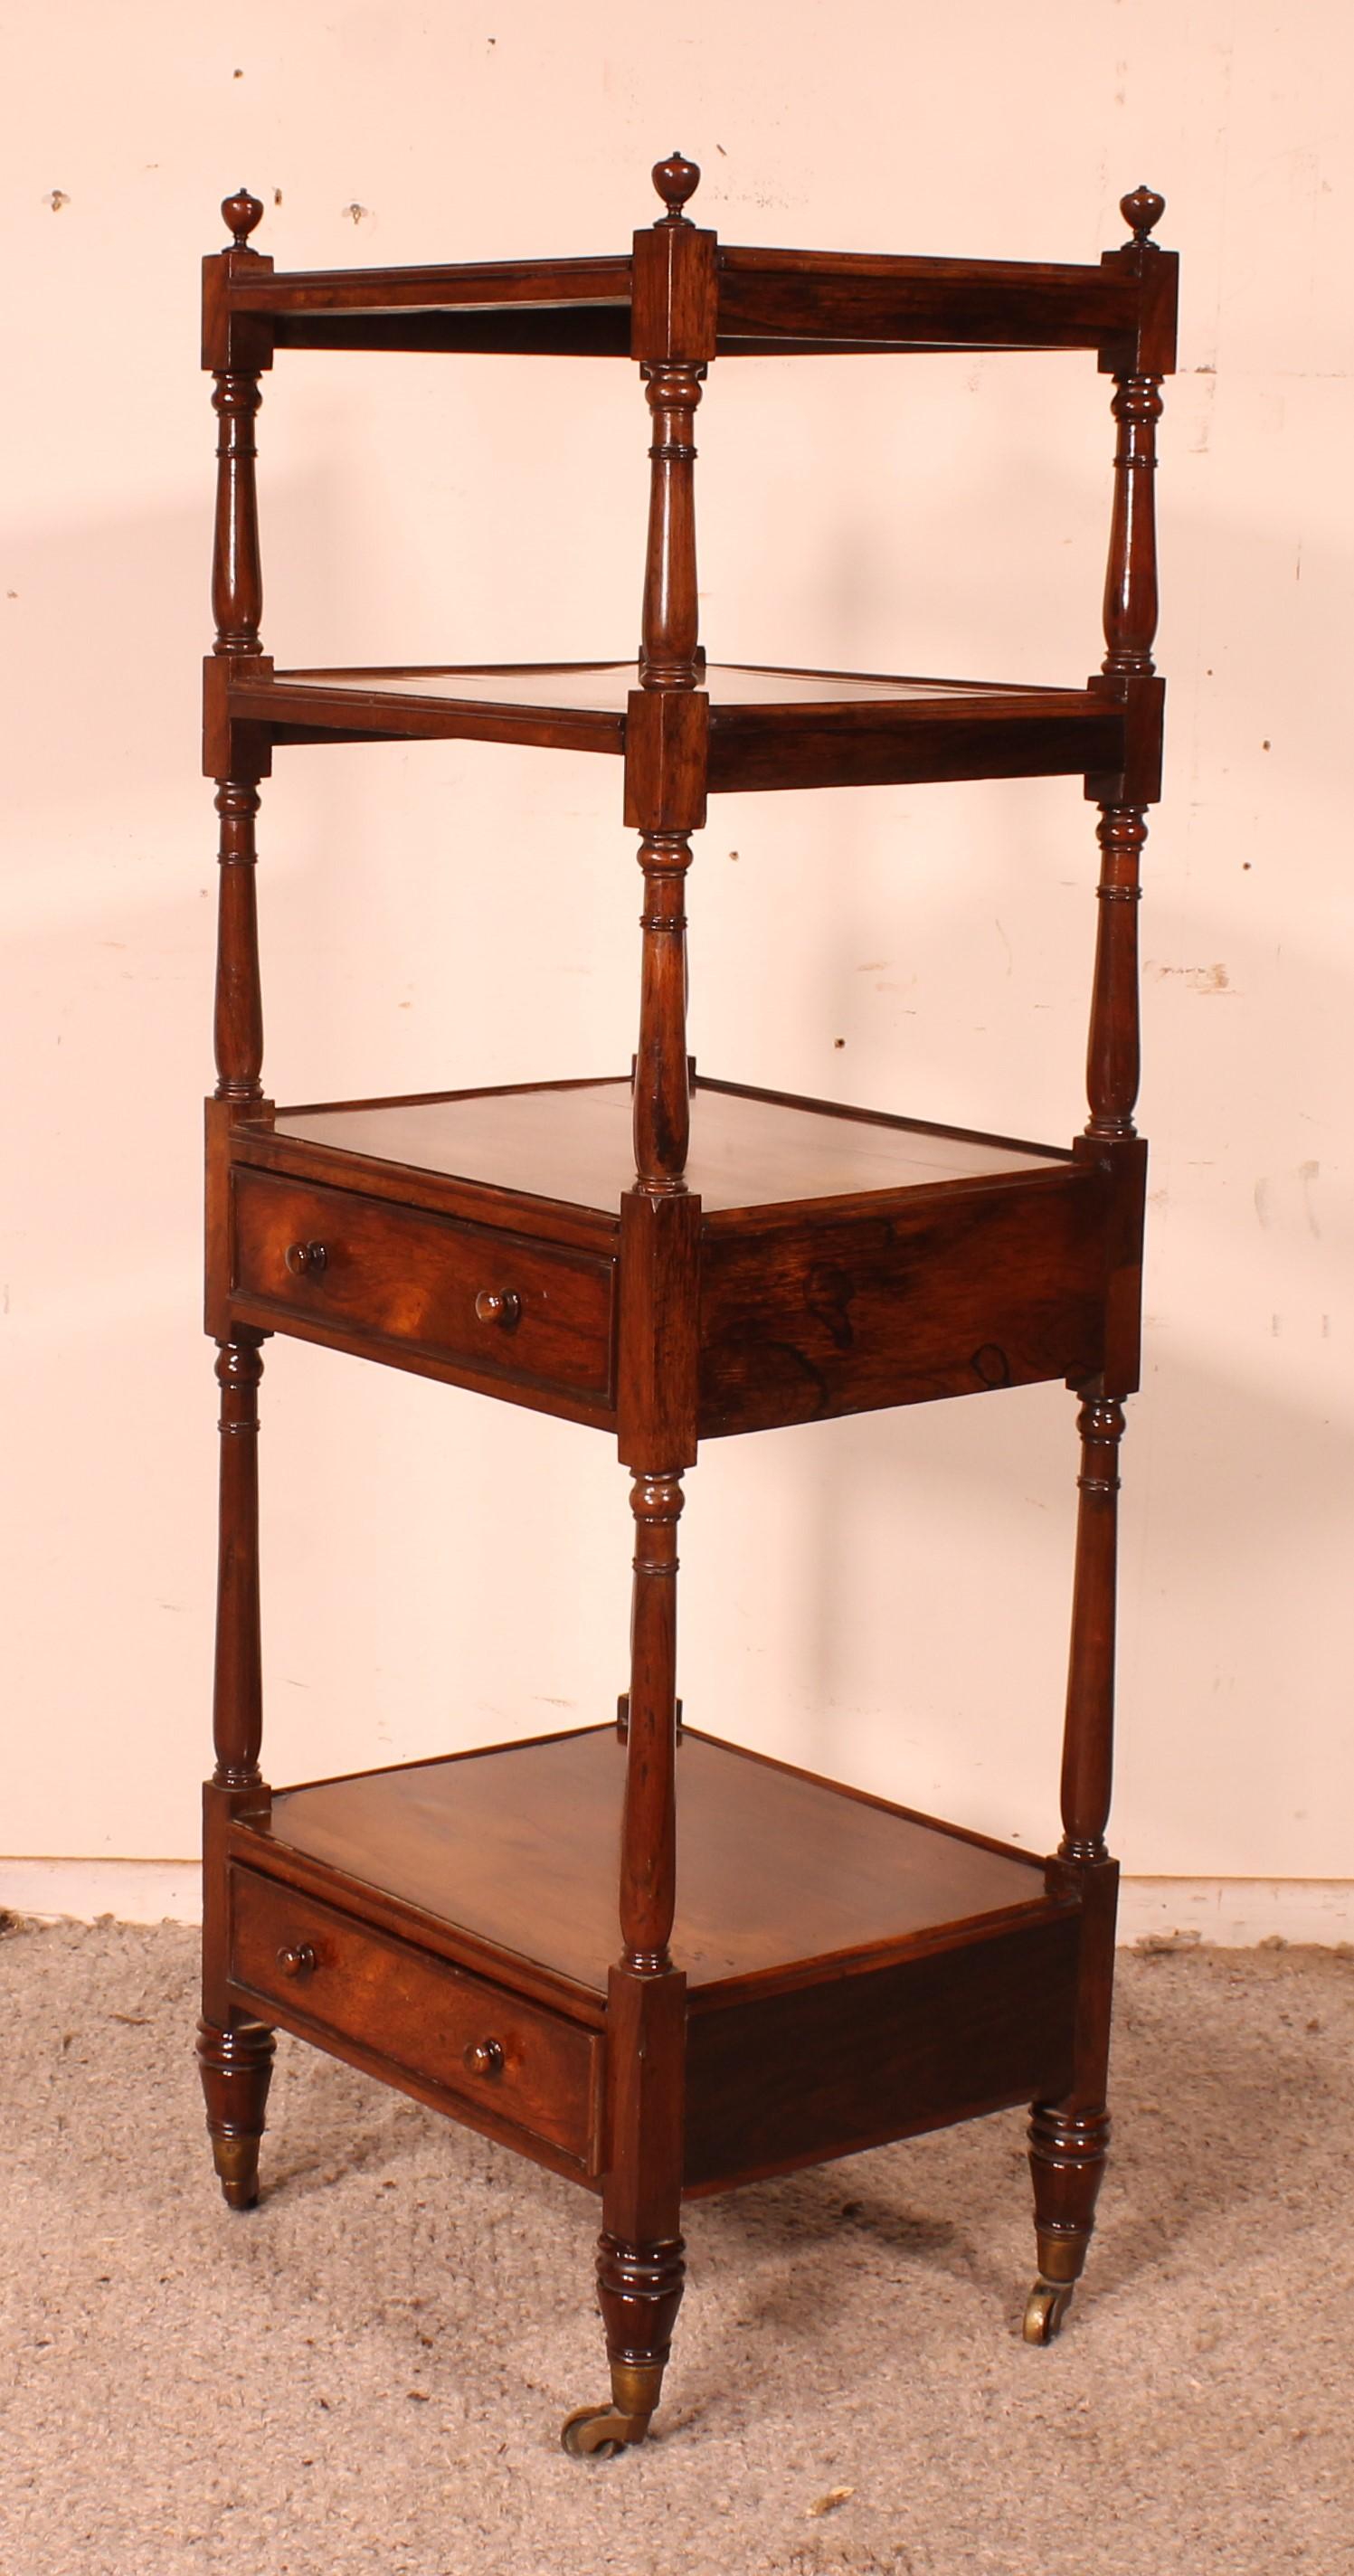 Rosewood Whatnot Or Shelf From 19th Century - England 5